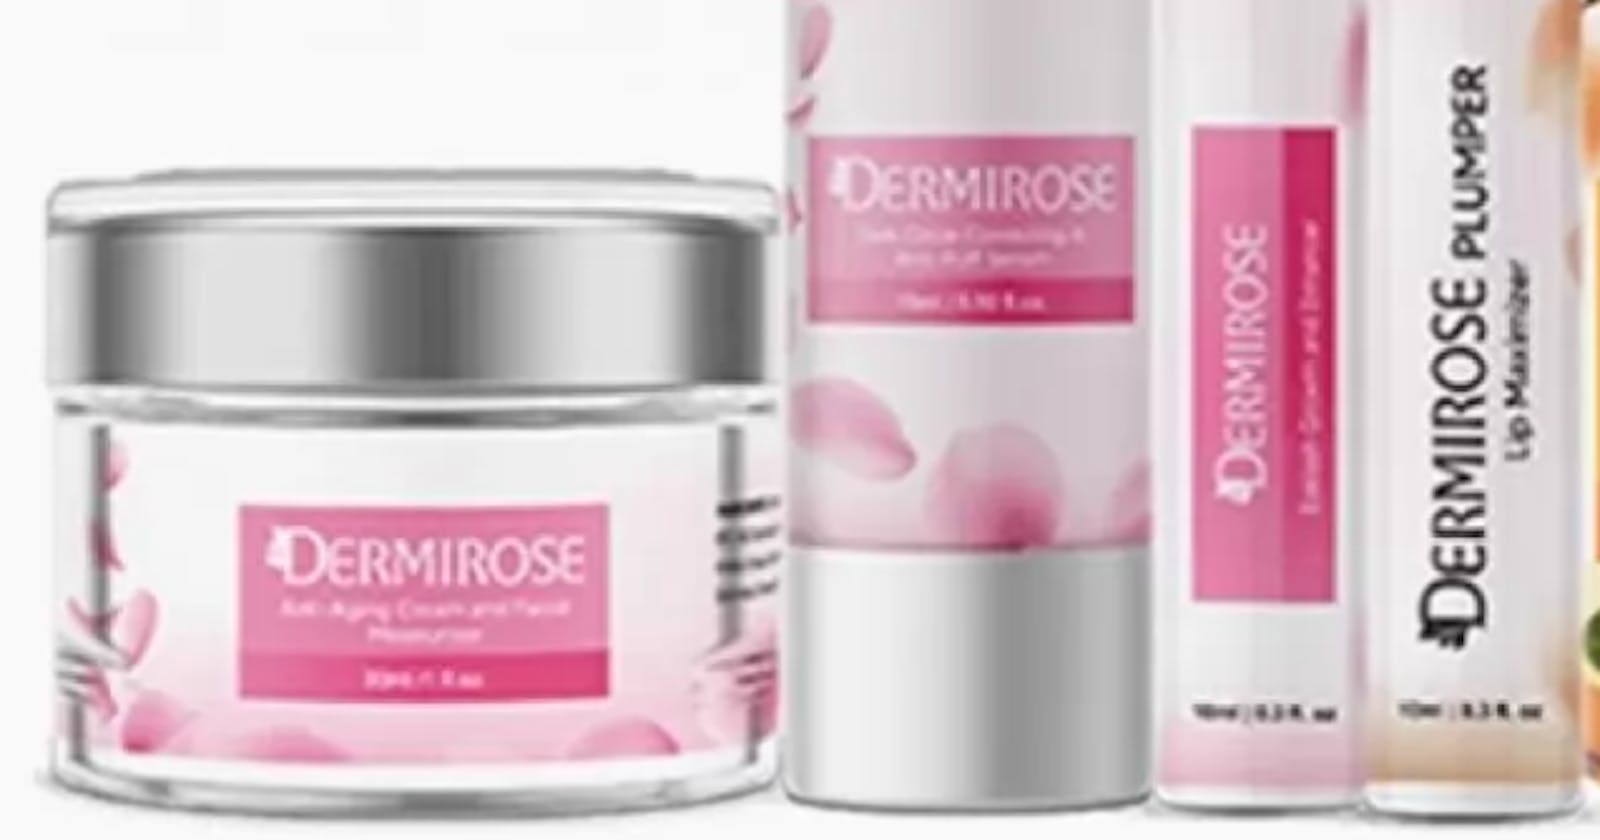 Dermirose Skin Tag Remover Review?